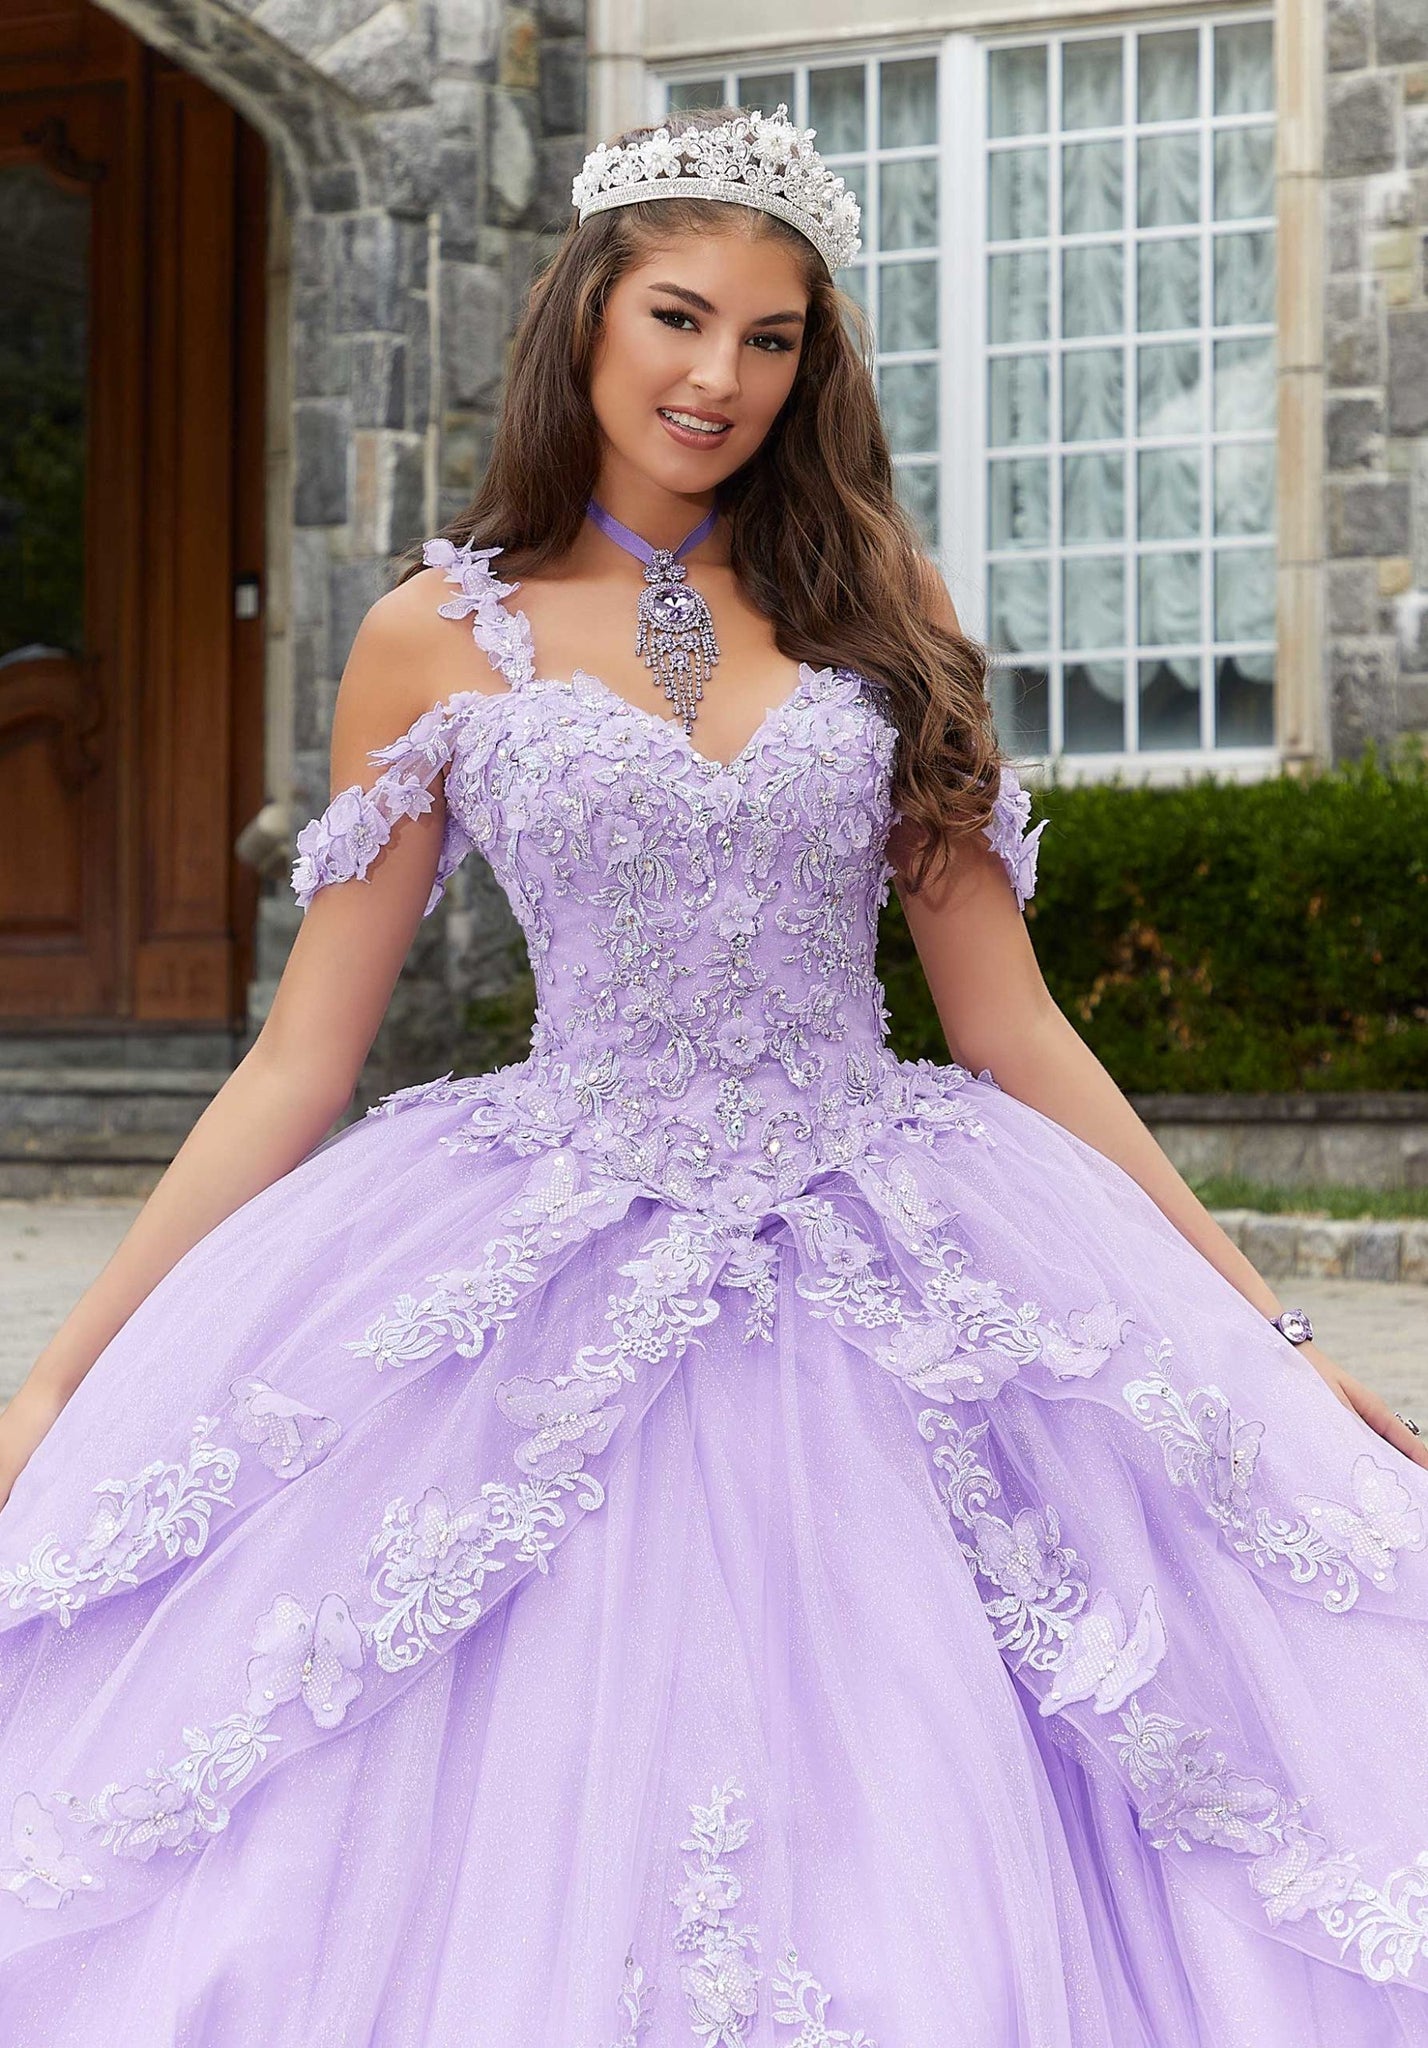 Metallic Embroidered Quinceañera Dress with Three-Dimensional Butterflies